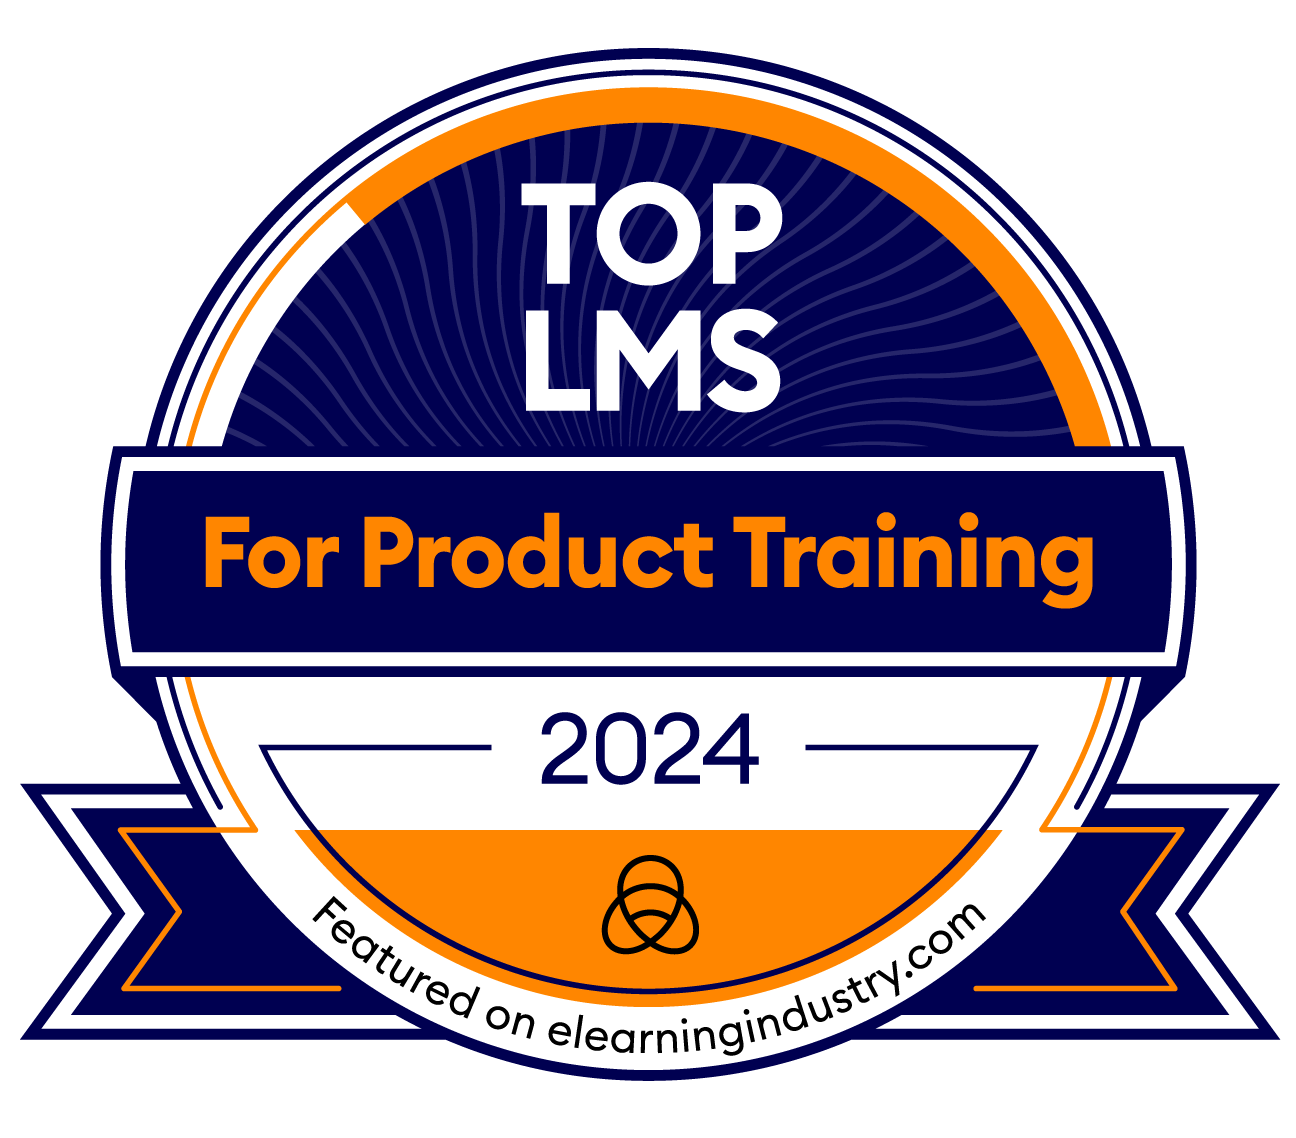 eLearning Industry - Top LMS for Product Training